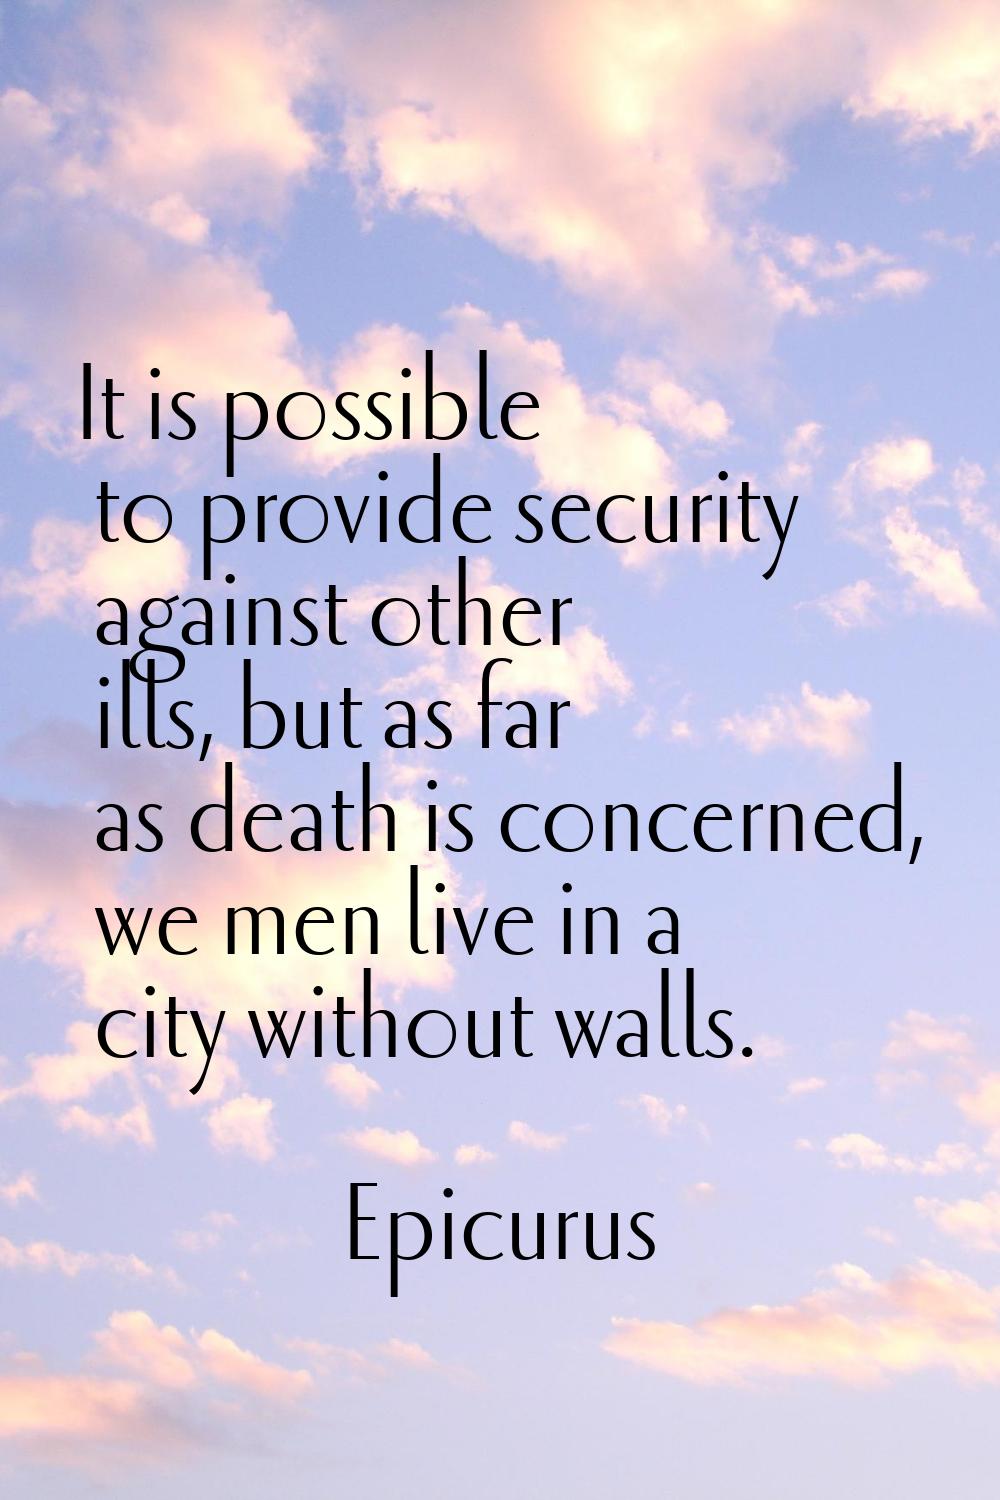 It is possible to provide security against other ills, but as far as death is concerned, we men liv